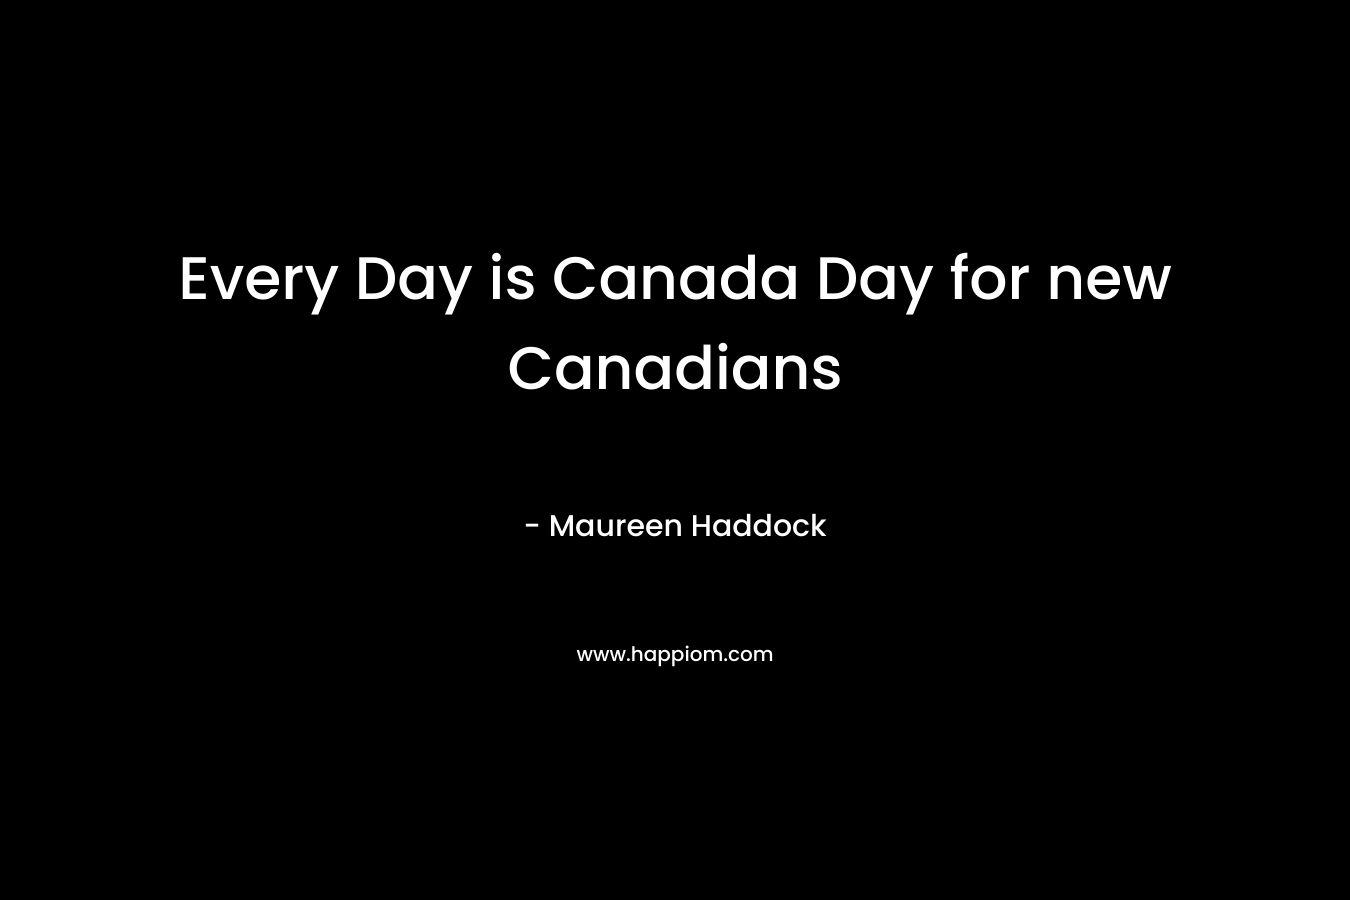 Every Day is Canada Day for new Canadians